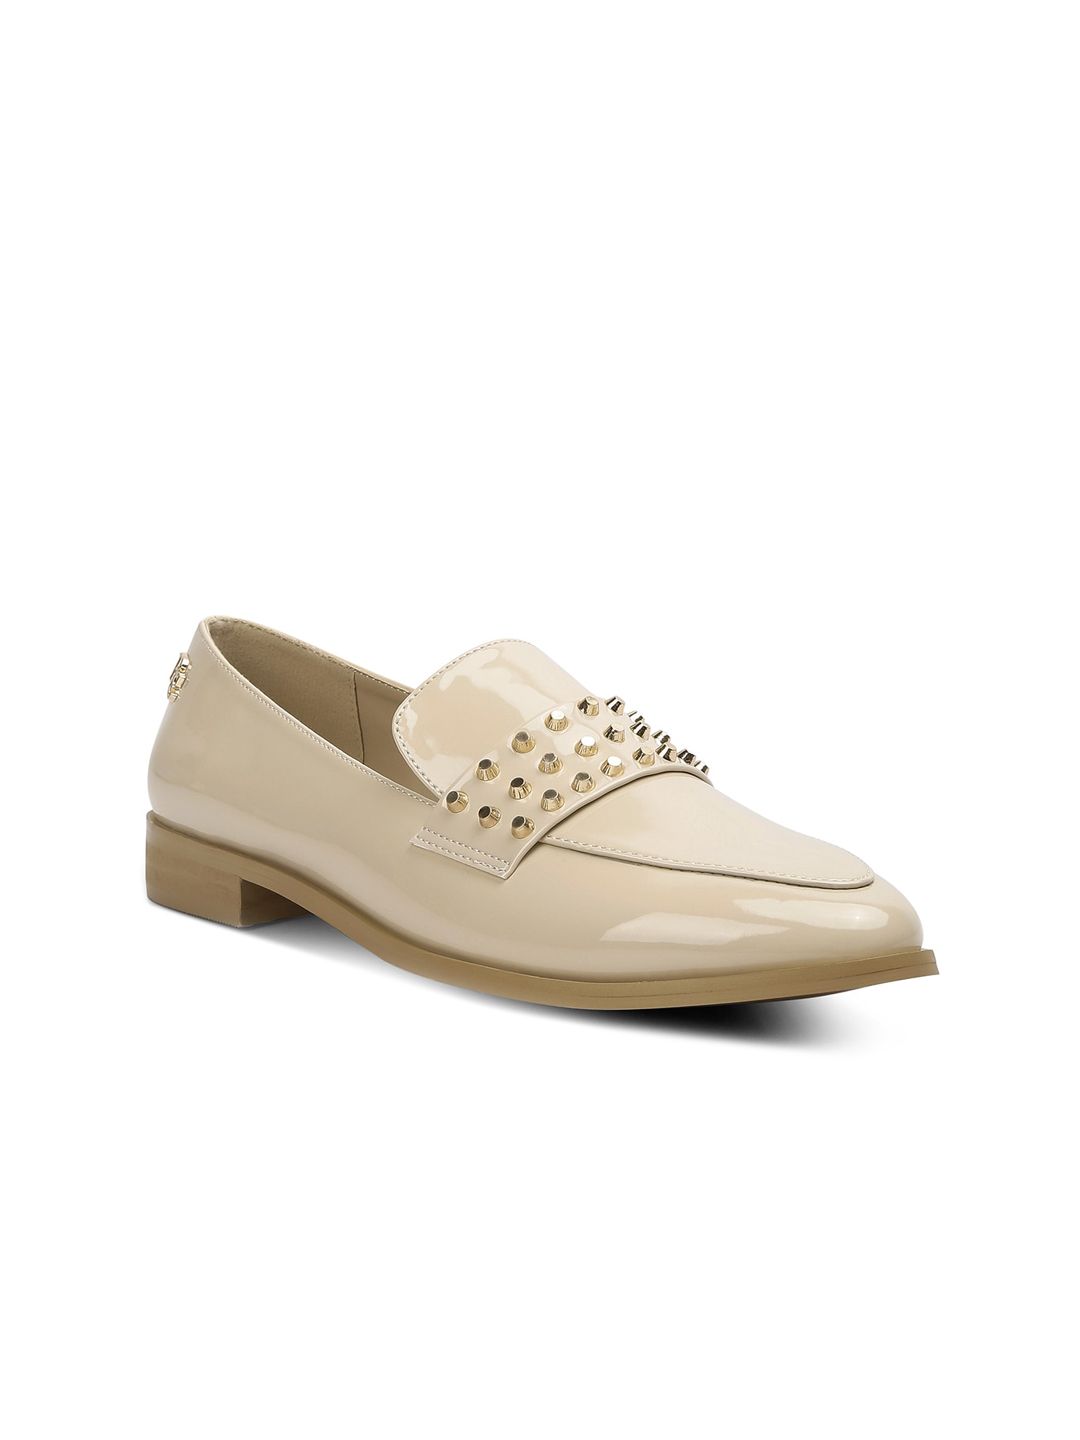 RAG & CO Women Stud Detail Patent Loafers Price in India